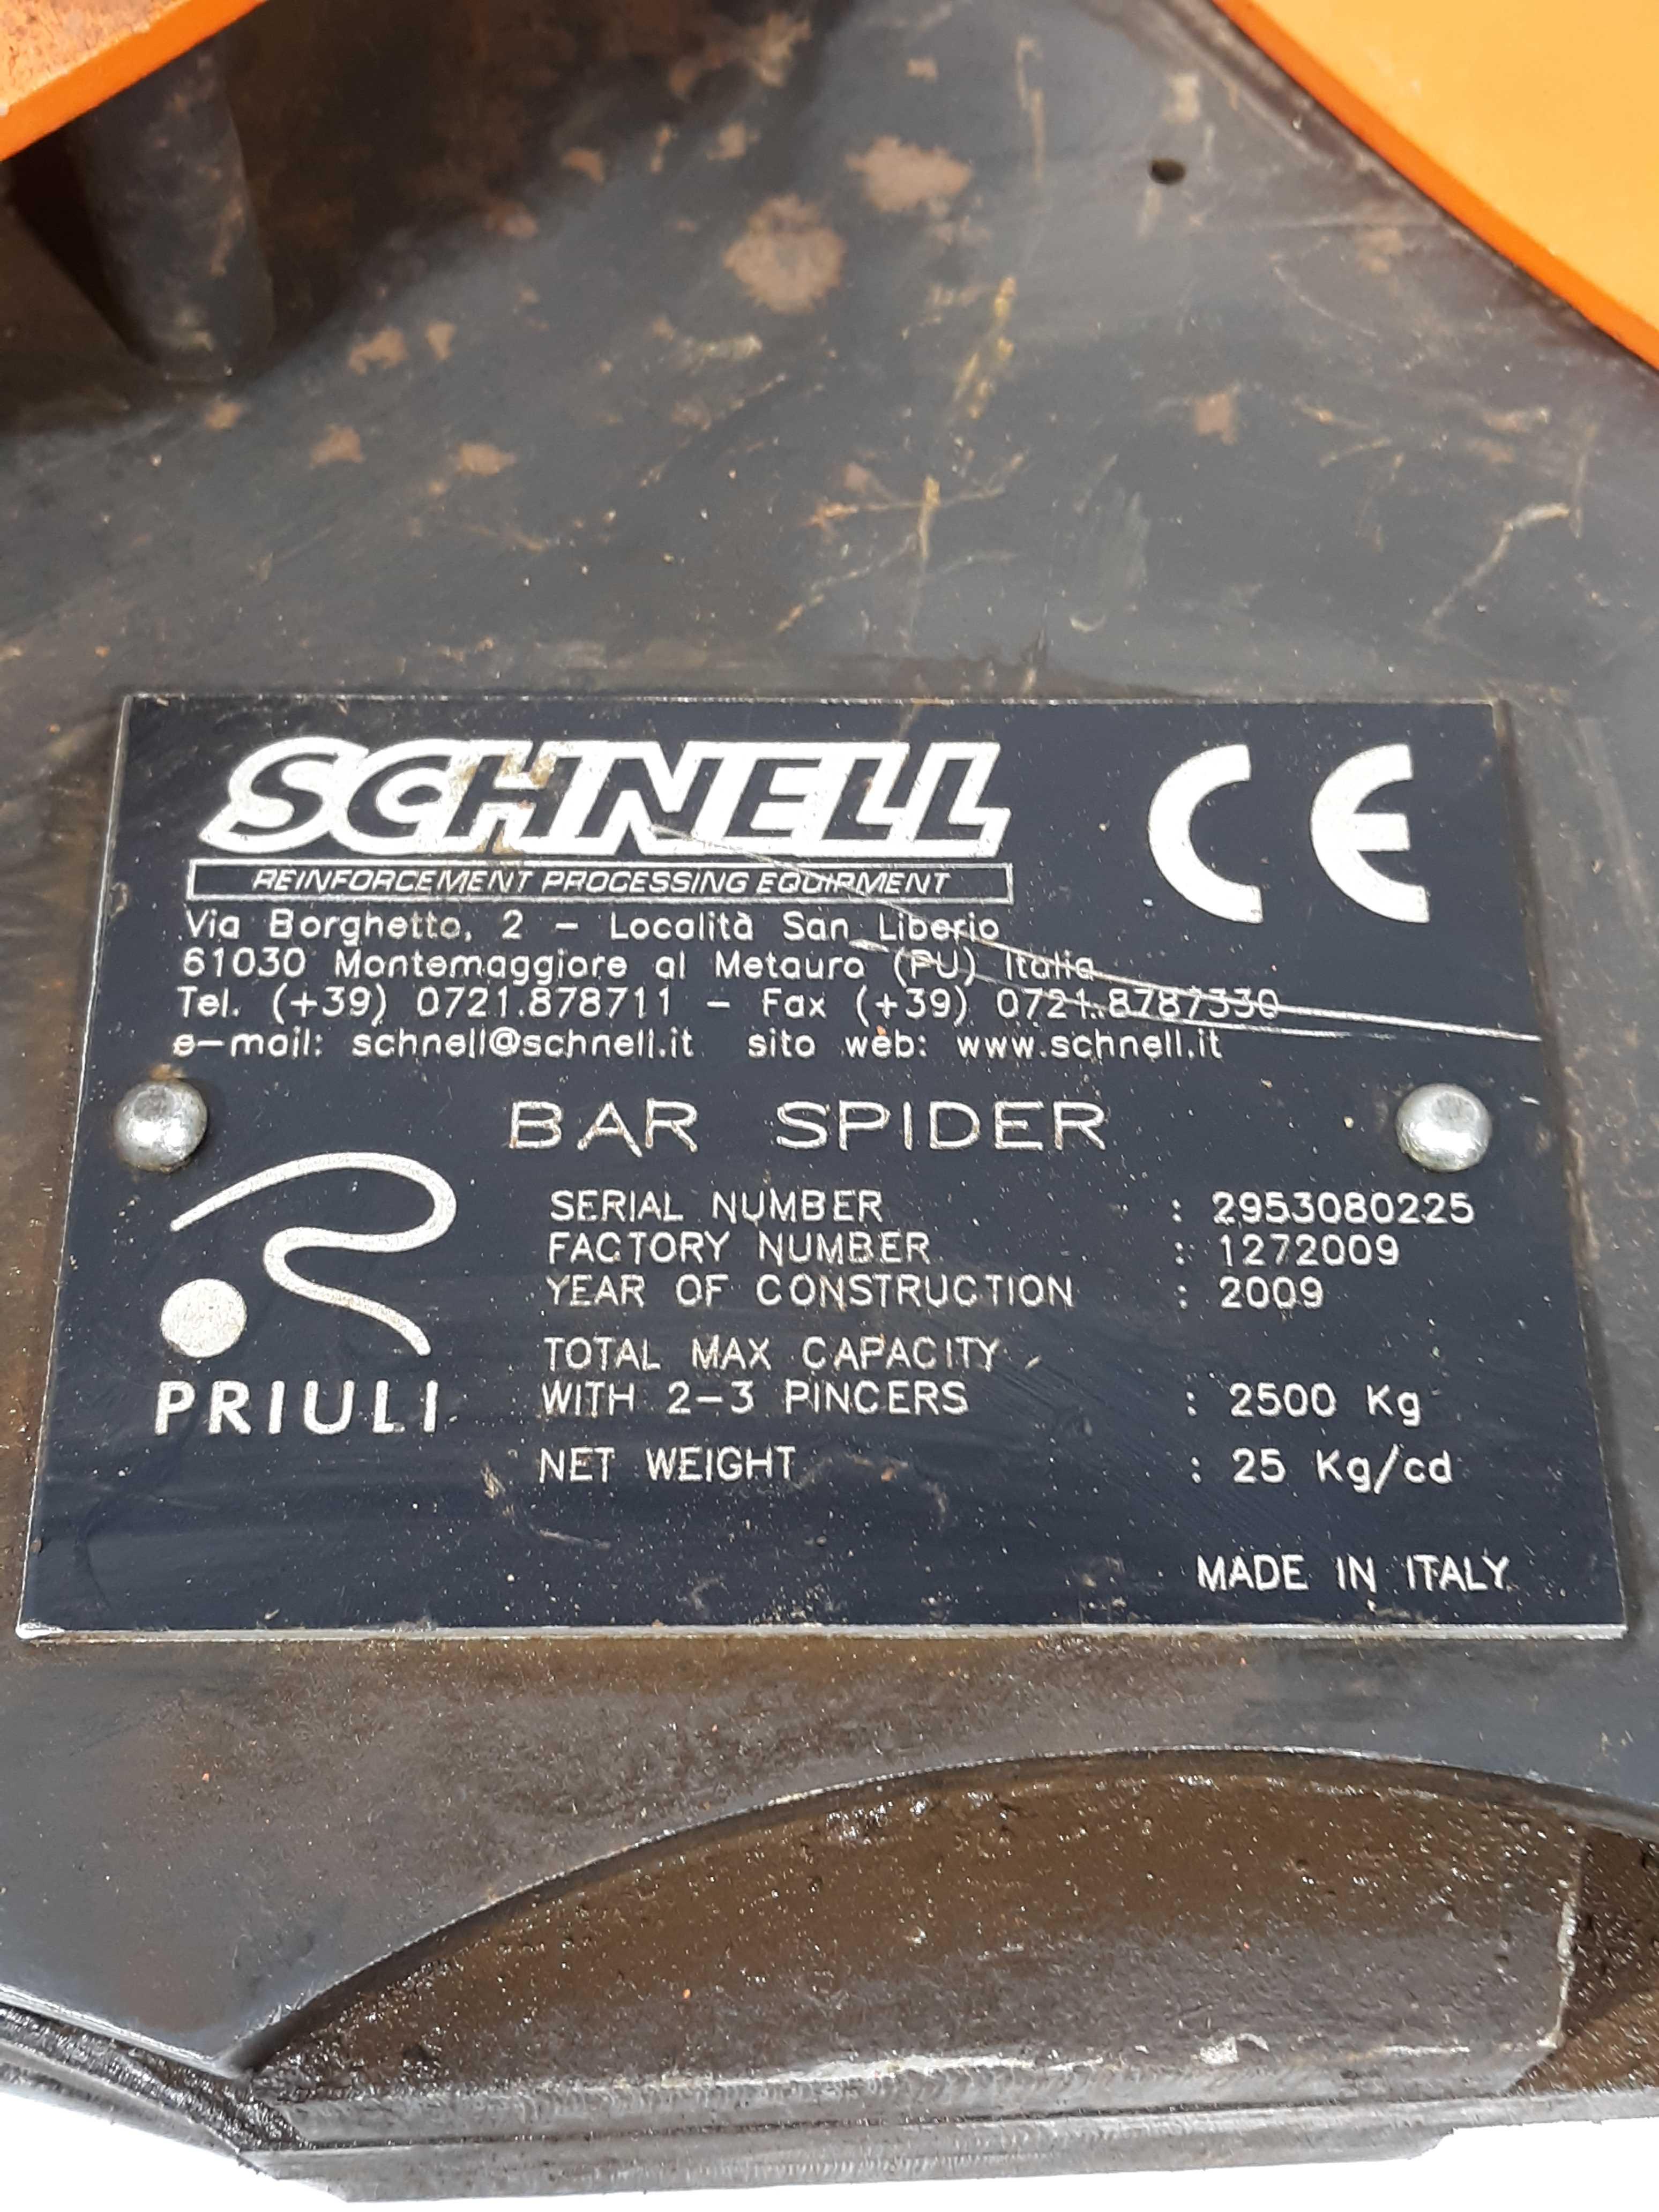 Schnell 1272009 Bar Spider Lift Equipment Automatic Release 2500kg 